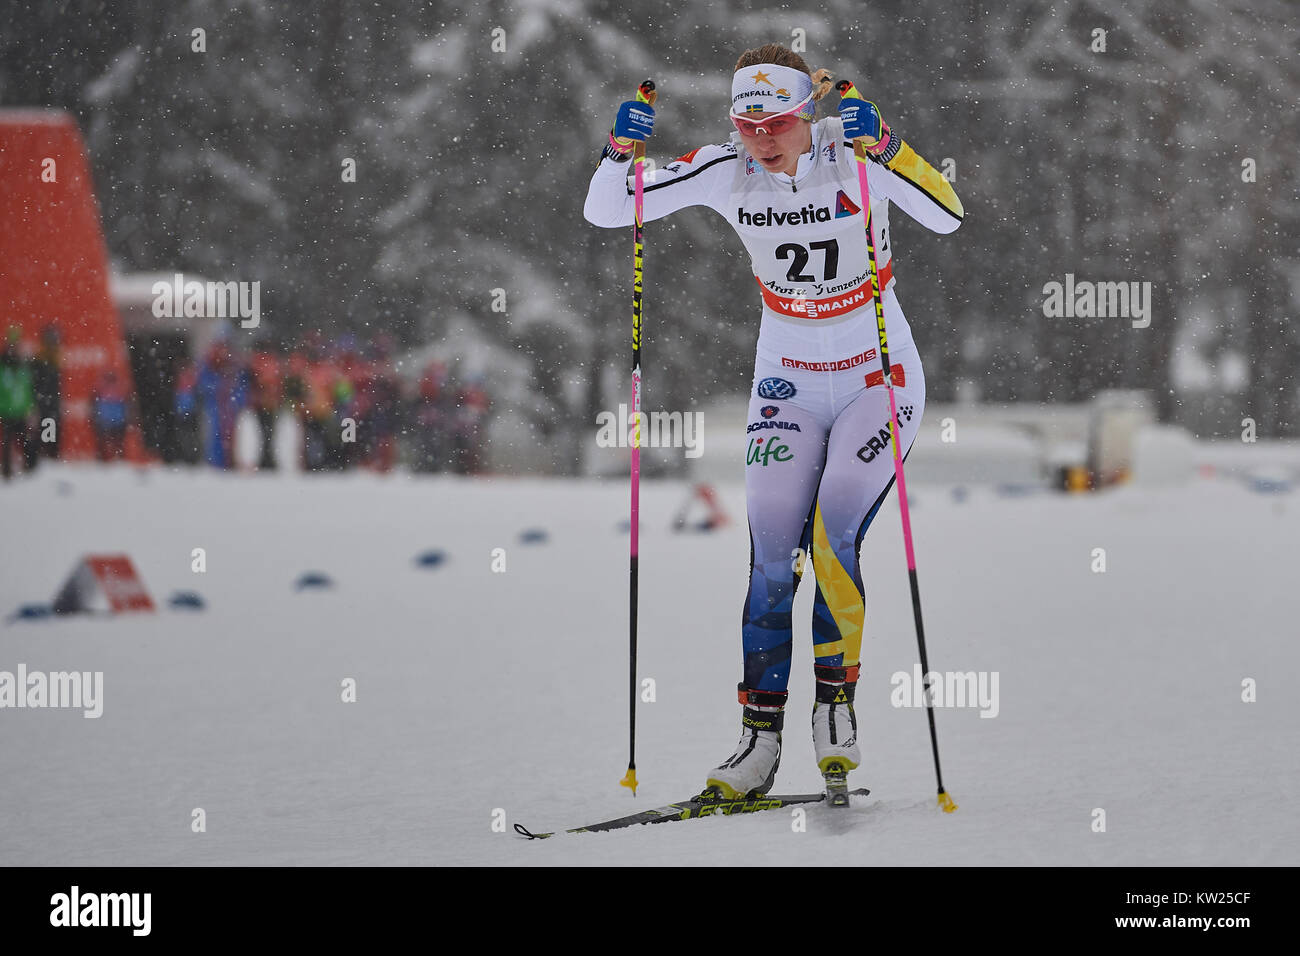 Lenzerheide, Switzerland, 30th December 2017. SETTLIN Evelina (SWE) during the Ladies’ 1.5 km Sprint Competition at the FIS Cross Country Worldcup Tour de Ski 2017 in Lenzerheide. Photo: Cronos/Rolf Simeon/Alamy Live News Stock Photo